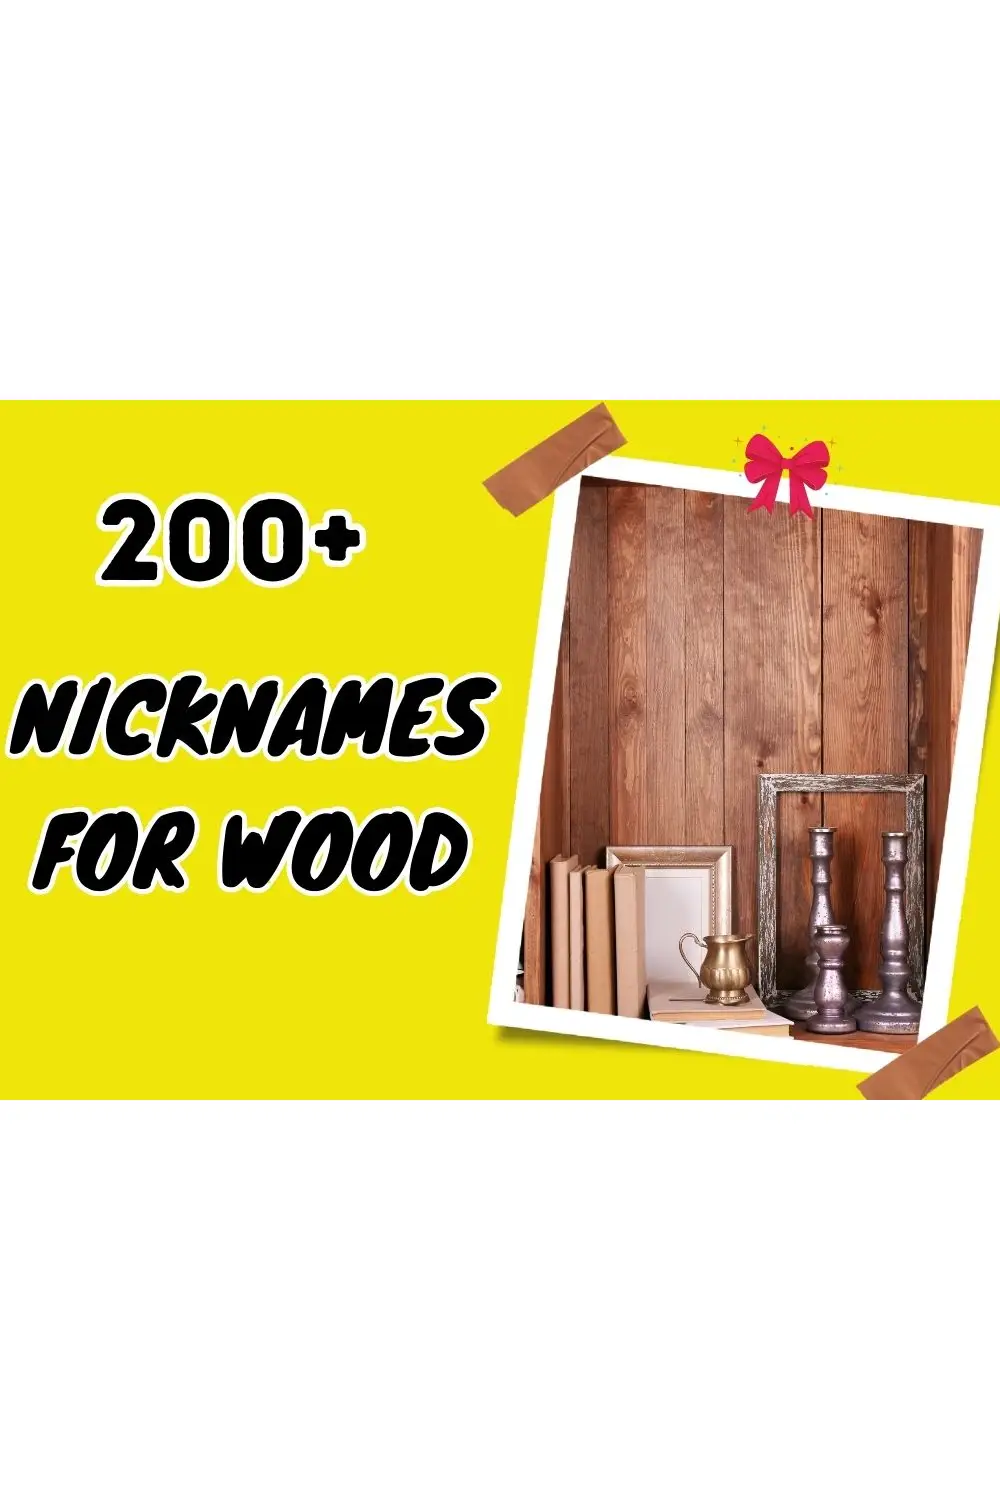 Nicknames for Wood - Personalize Your Wooden Treasures